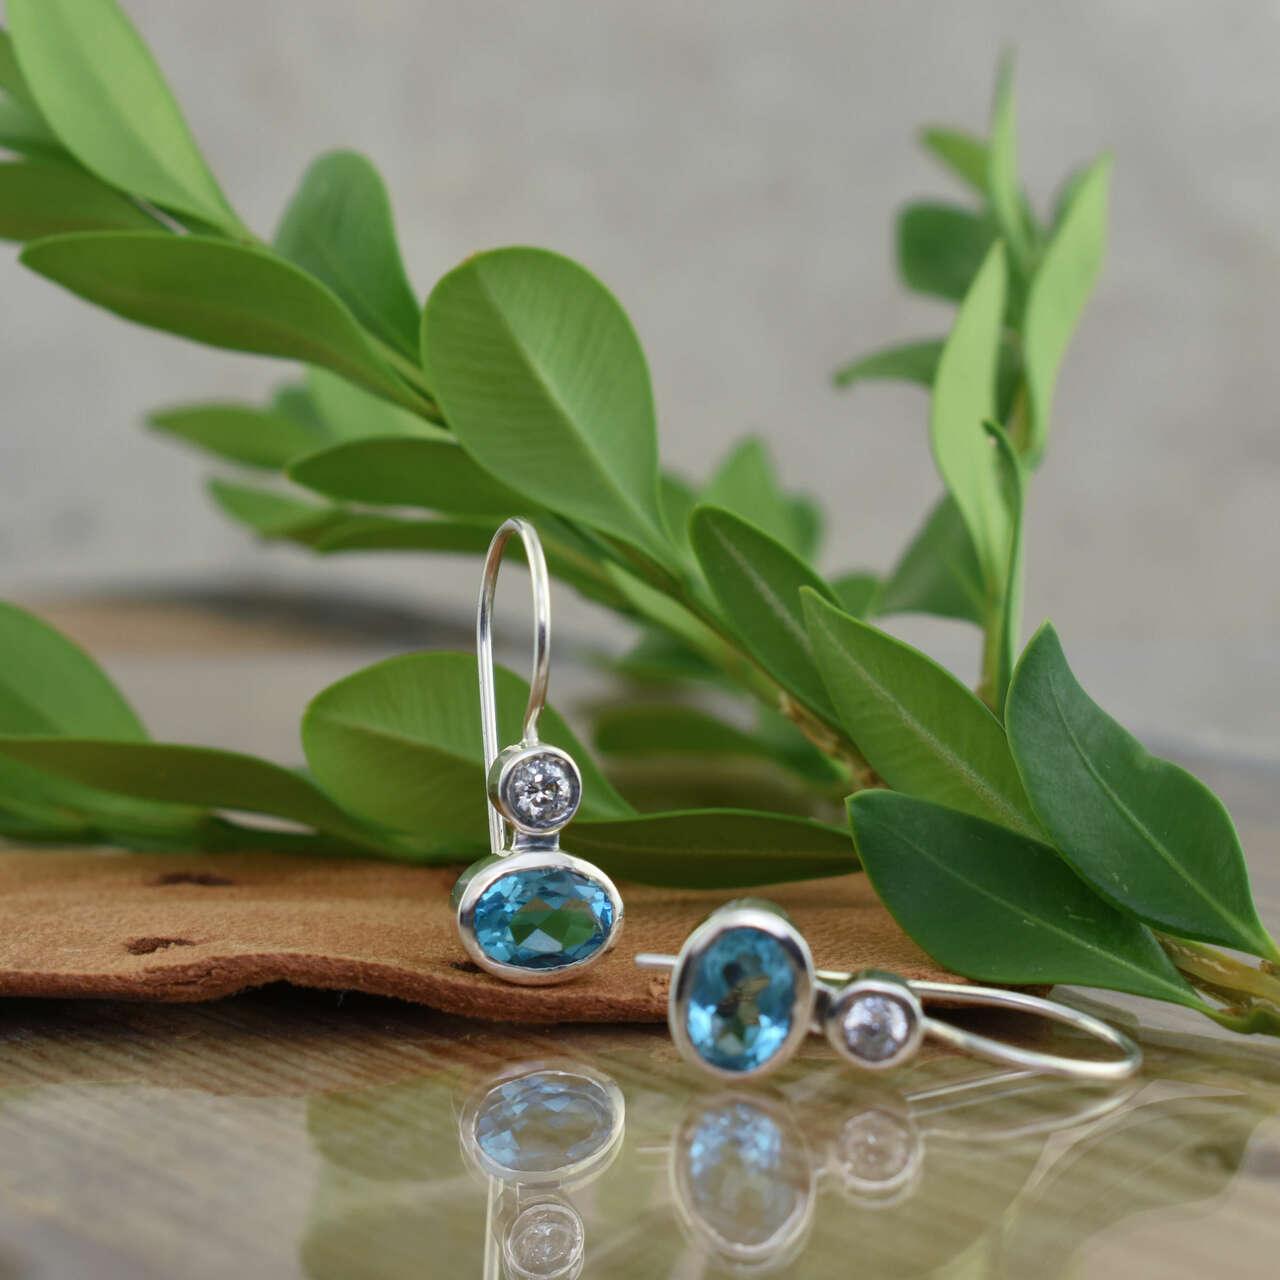 Sterling silver earrings with bezel set Clear and Capri Blue CZ